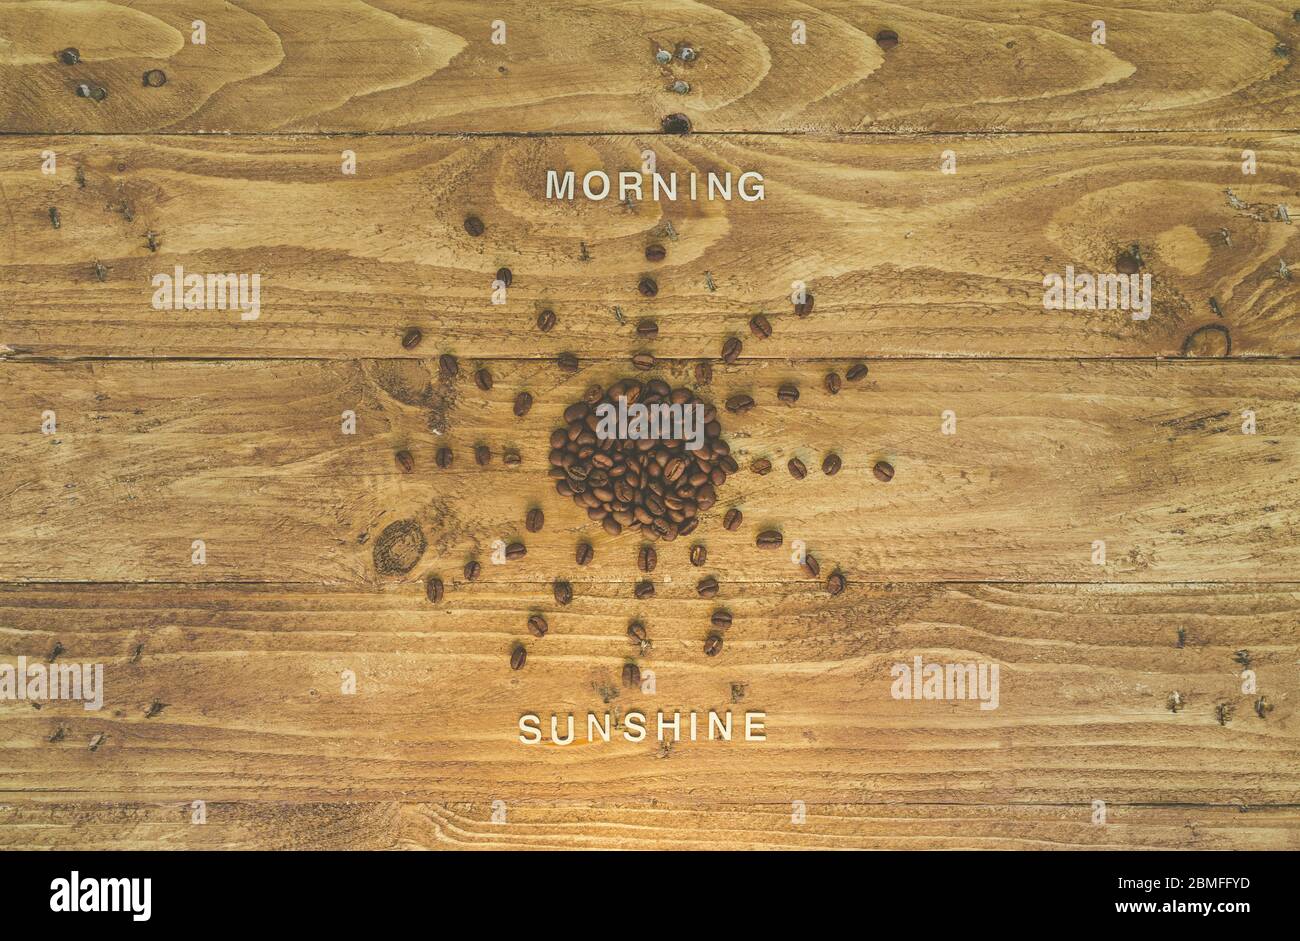 Coffee beans shaped as the sun on a wooden background, with the words “morning sunshine” written out with wooden letters Stock Photo